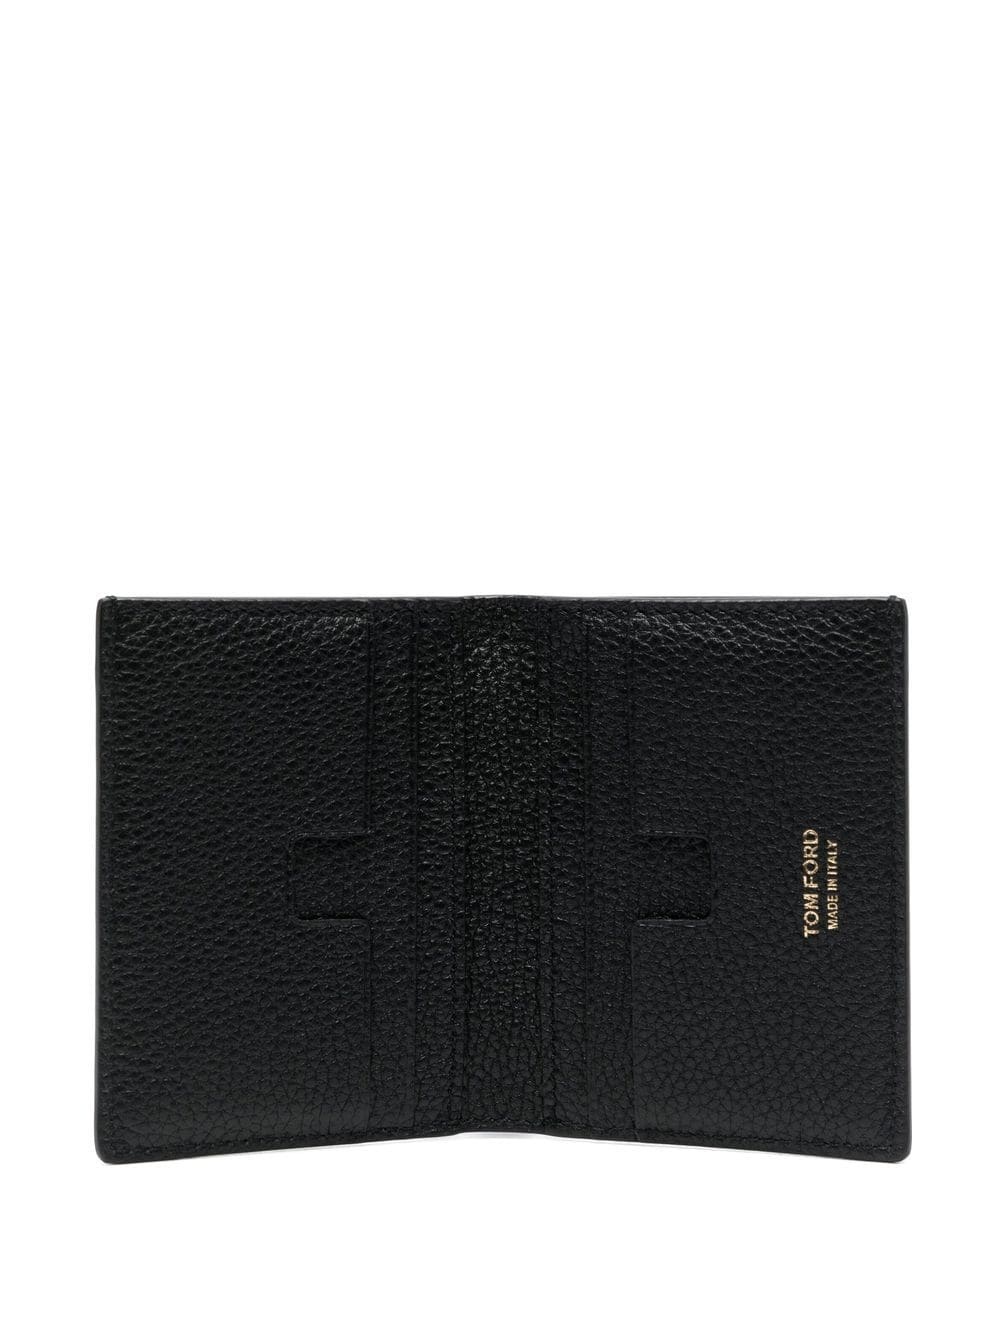 TOM FORD LEATHER WALLET - 3